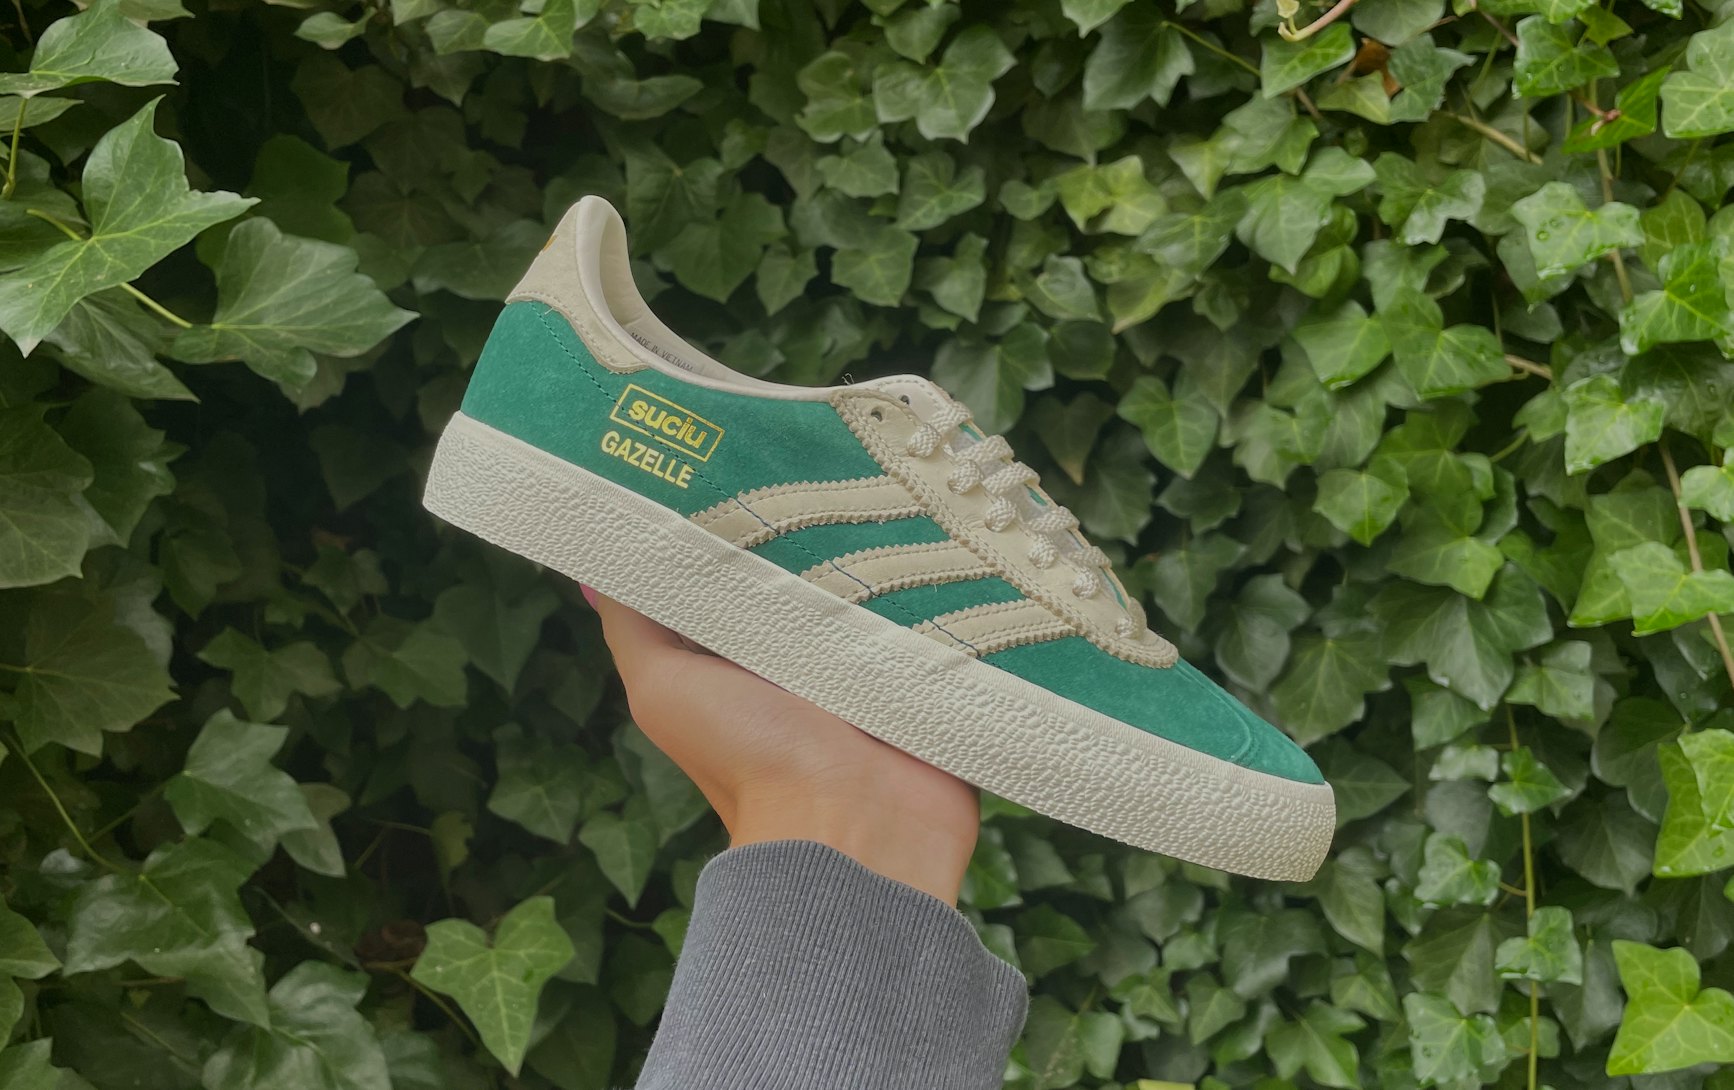 Adidas' Mark Suciu Gazelle: An awesome vintage-inspired sneaker